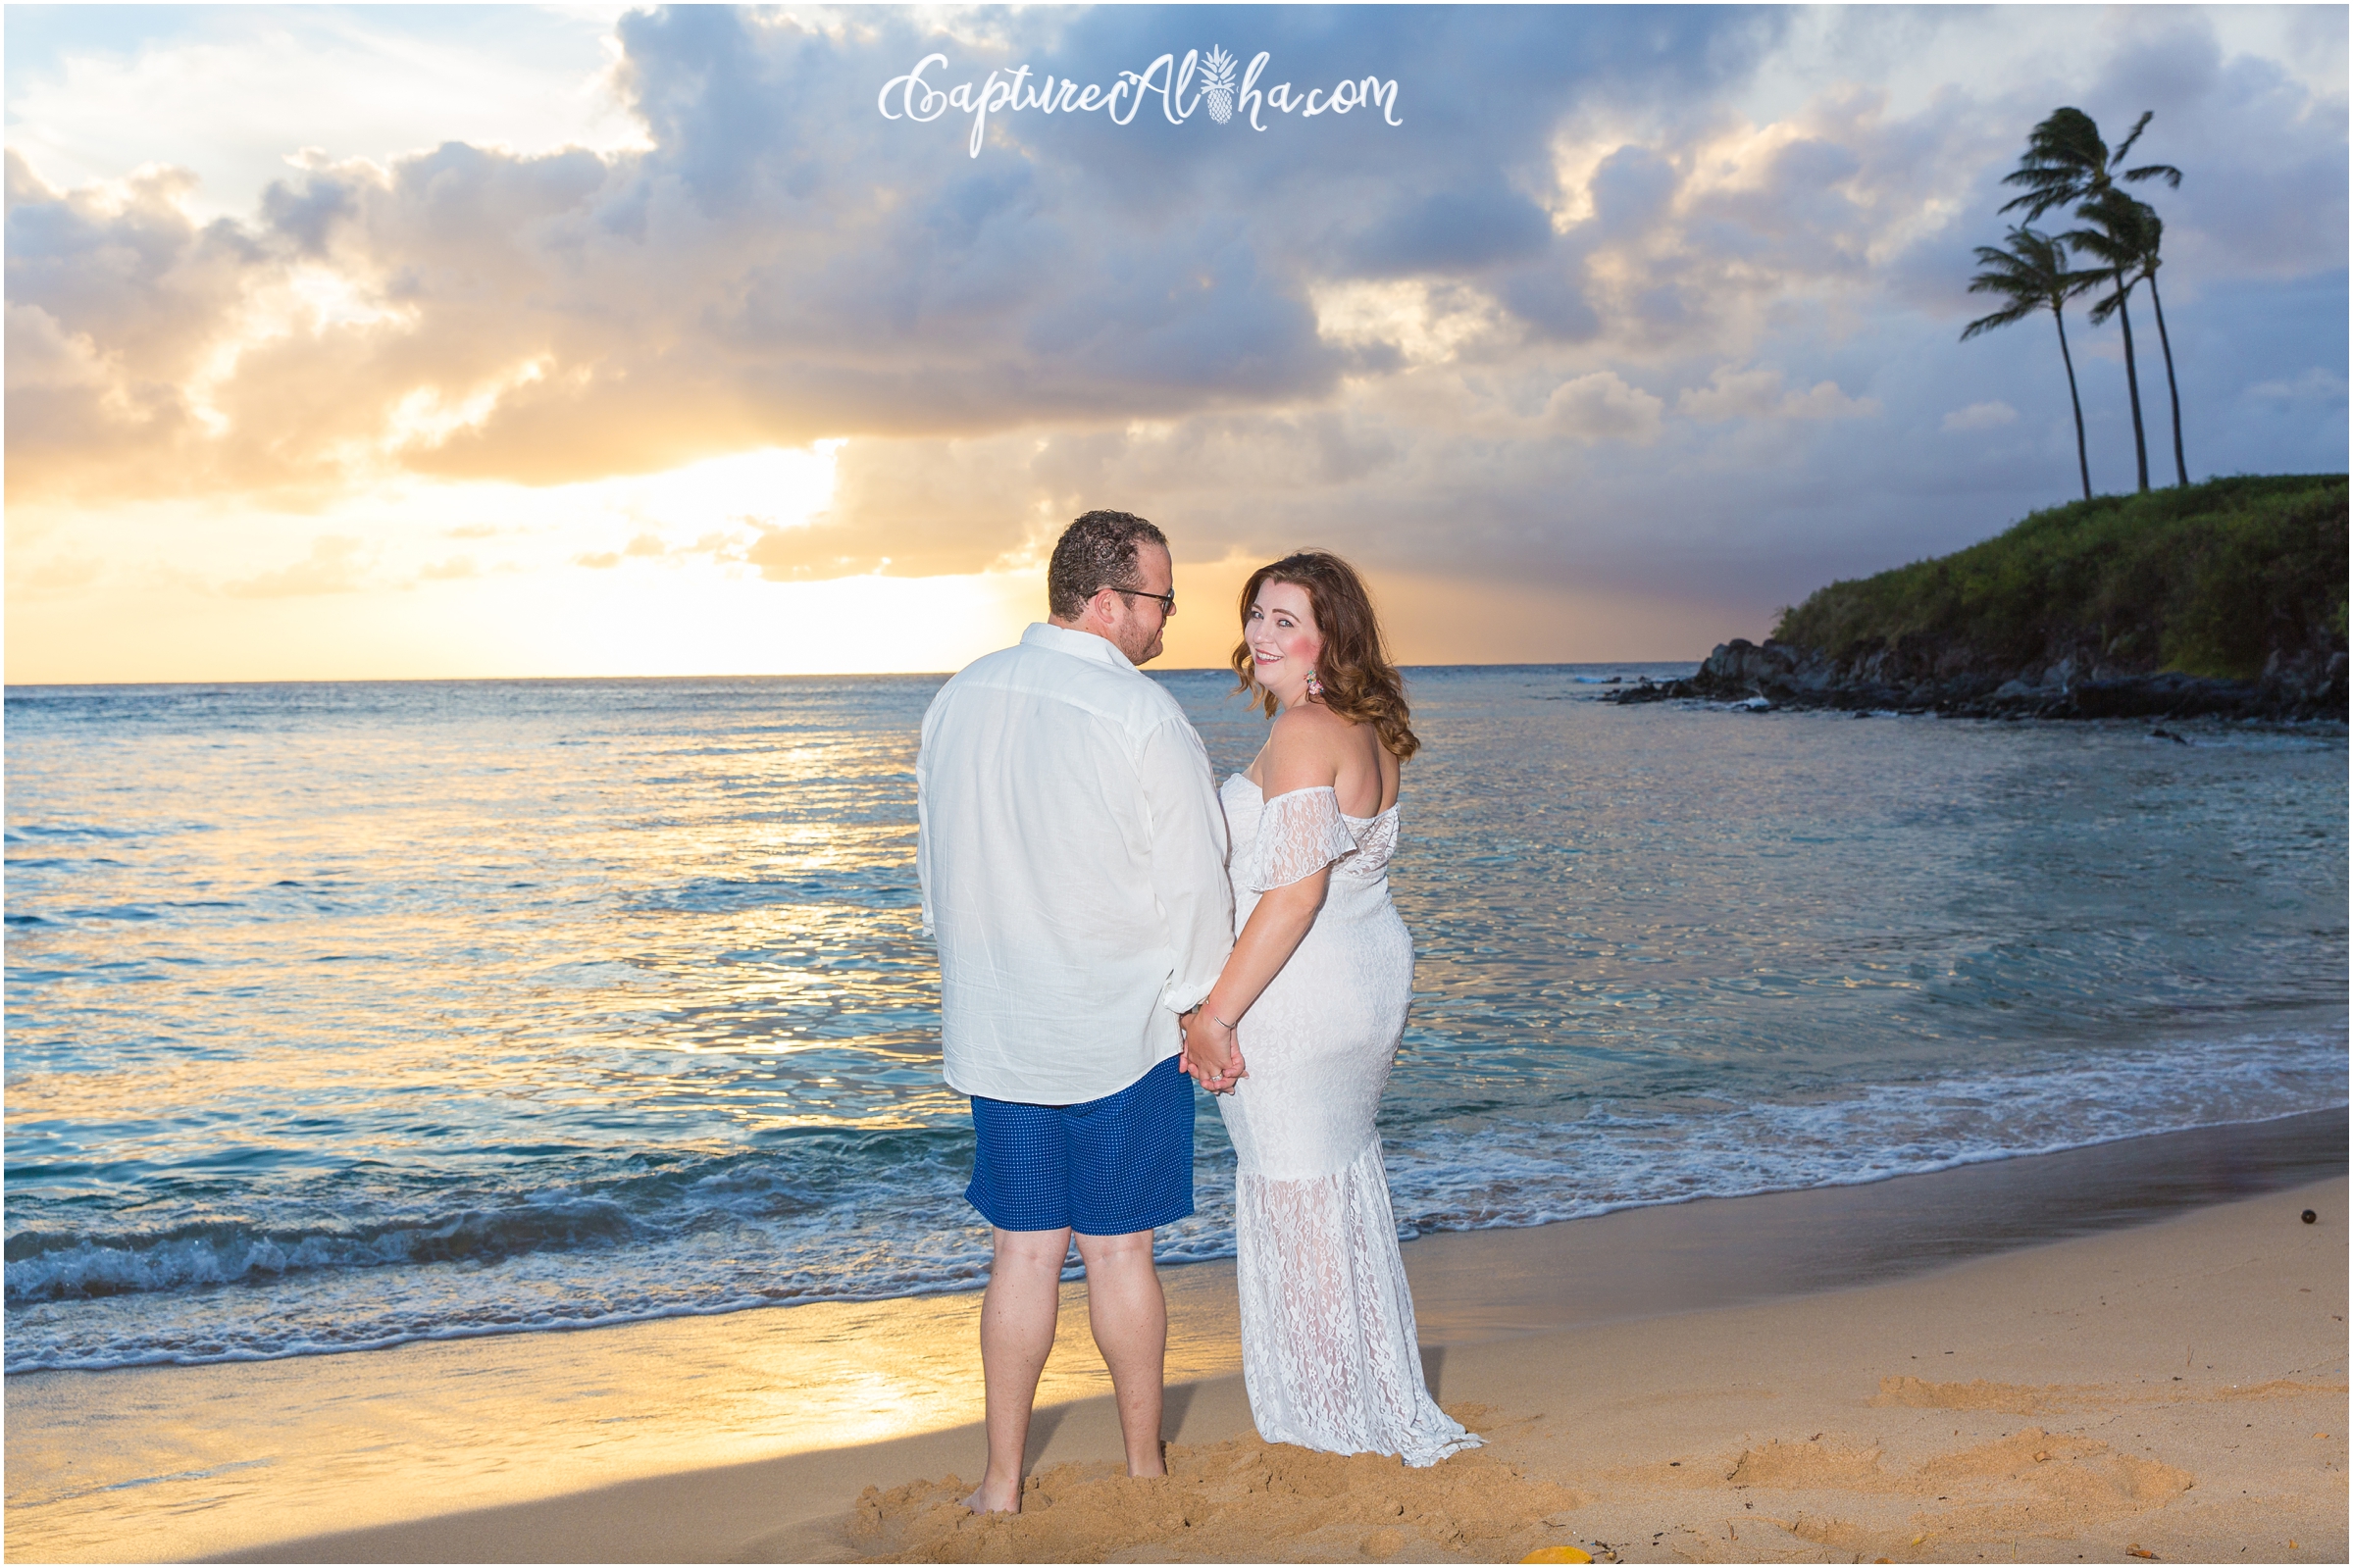 Maui Maternity Photographer at Kapalua Bay with Pregnant couple on the beach at sunset in Maui